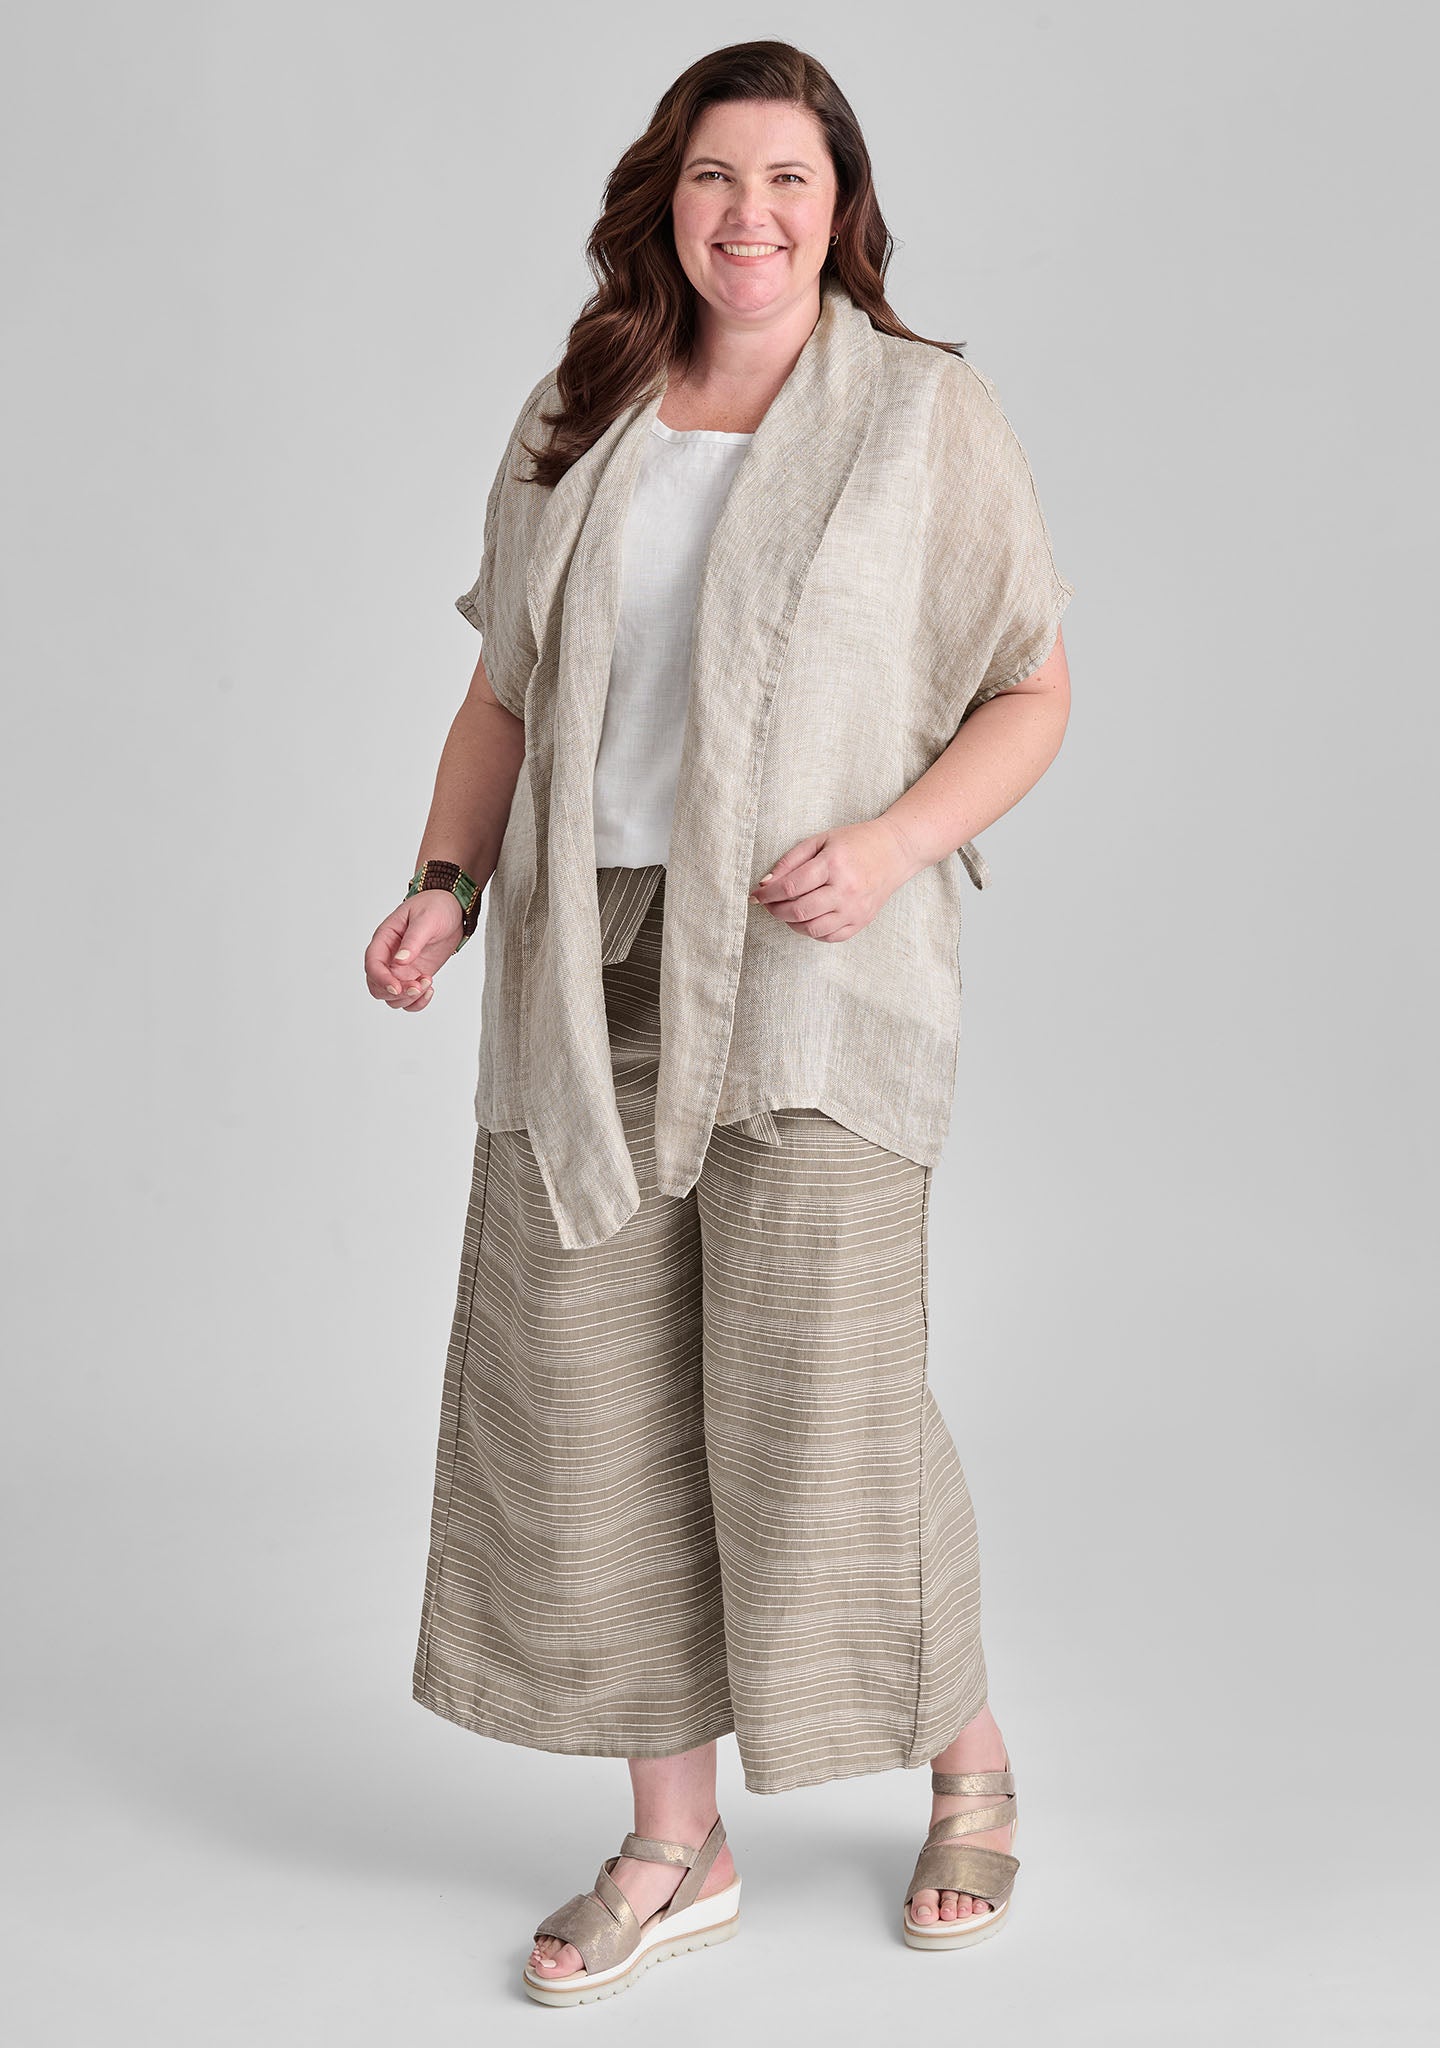 FLAX linen cardigan in natural with linen tank in white and linen pants in natural